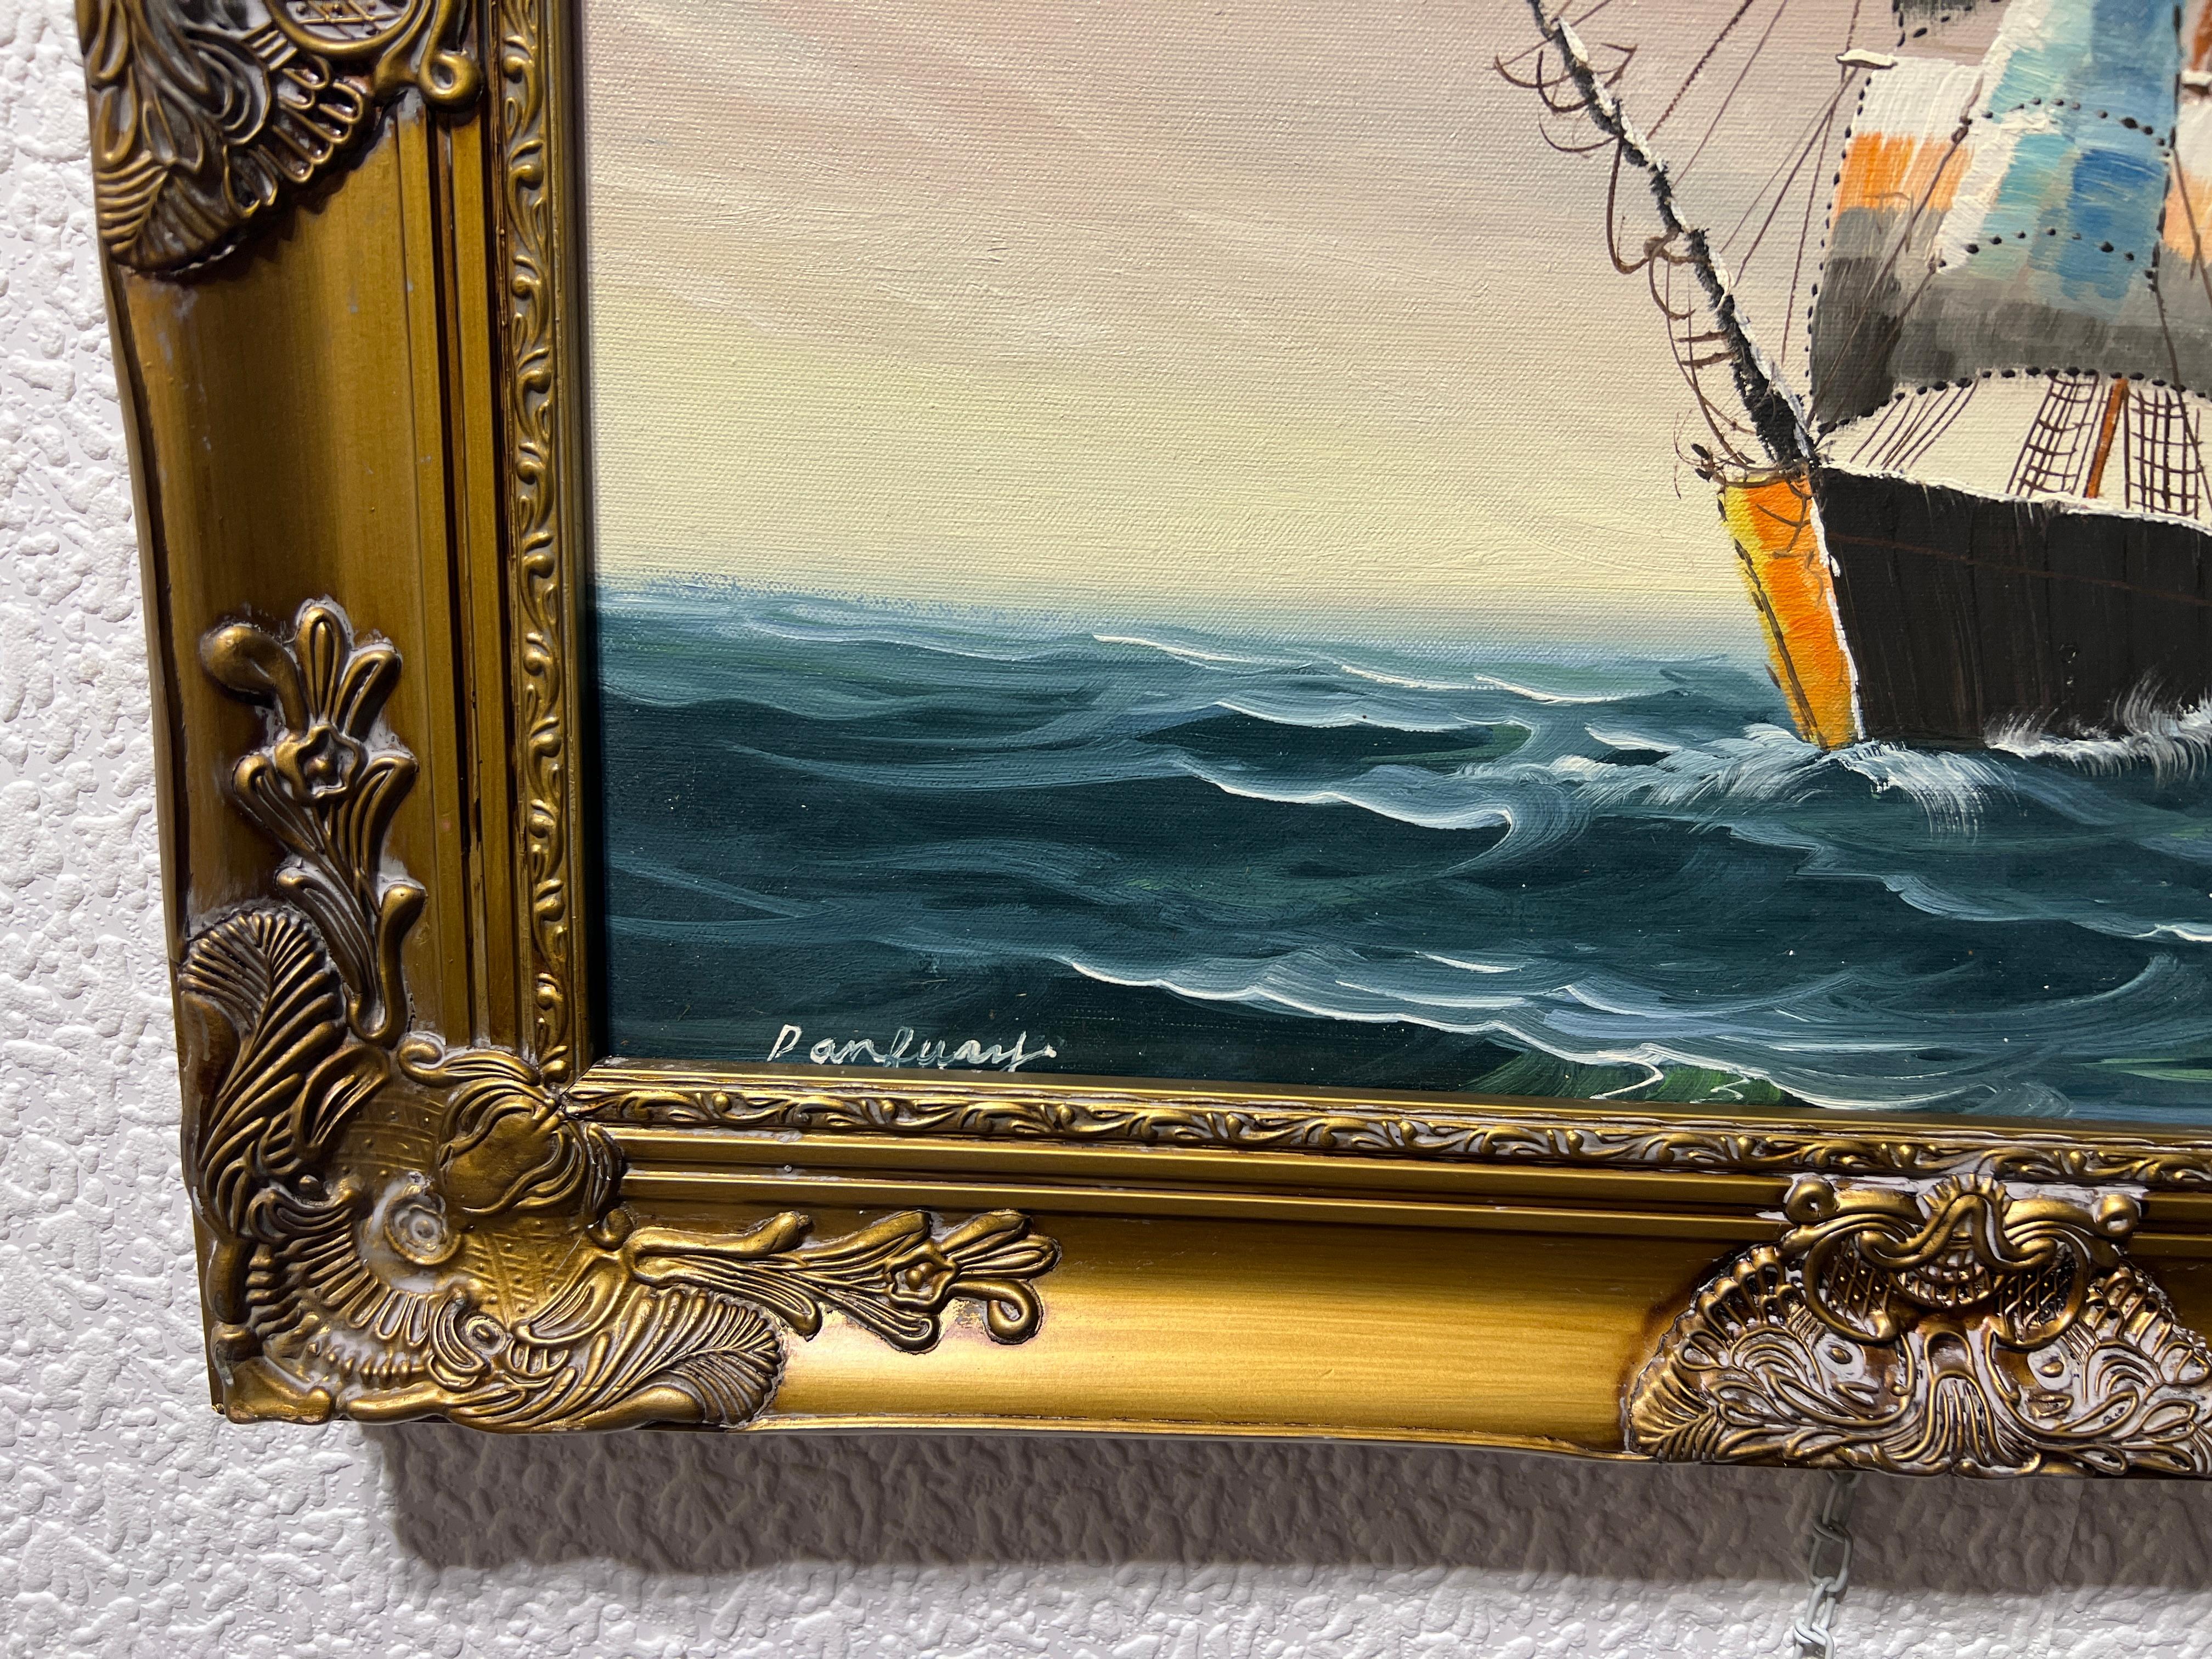 This is an original oil painting on canvas - a seascape featuring a sailing ship in the stormy ocean depicts a dramatic and turbulent scene with the ship battling against the forces of nature. The waves are high and rough, with whitecaps and foam